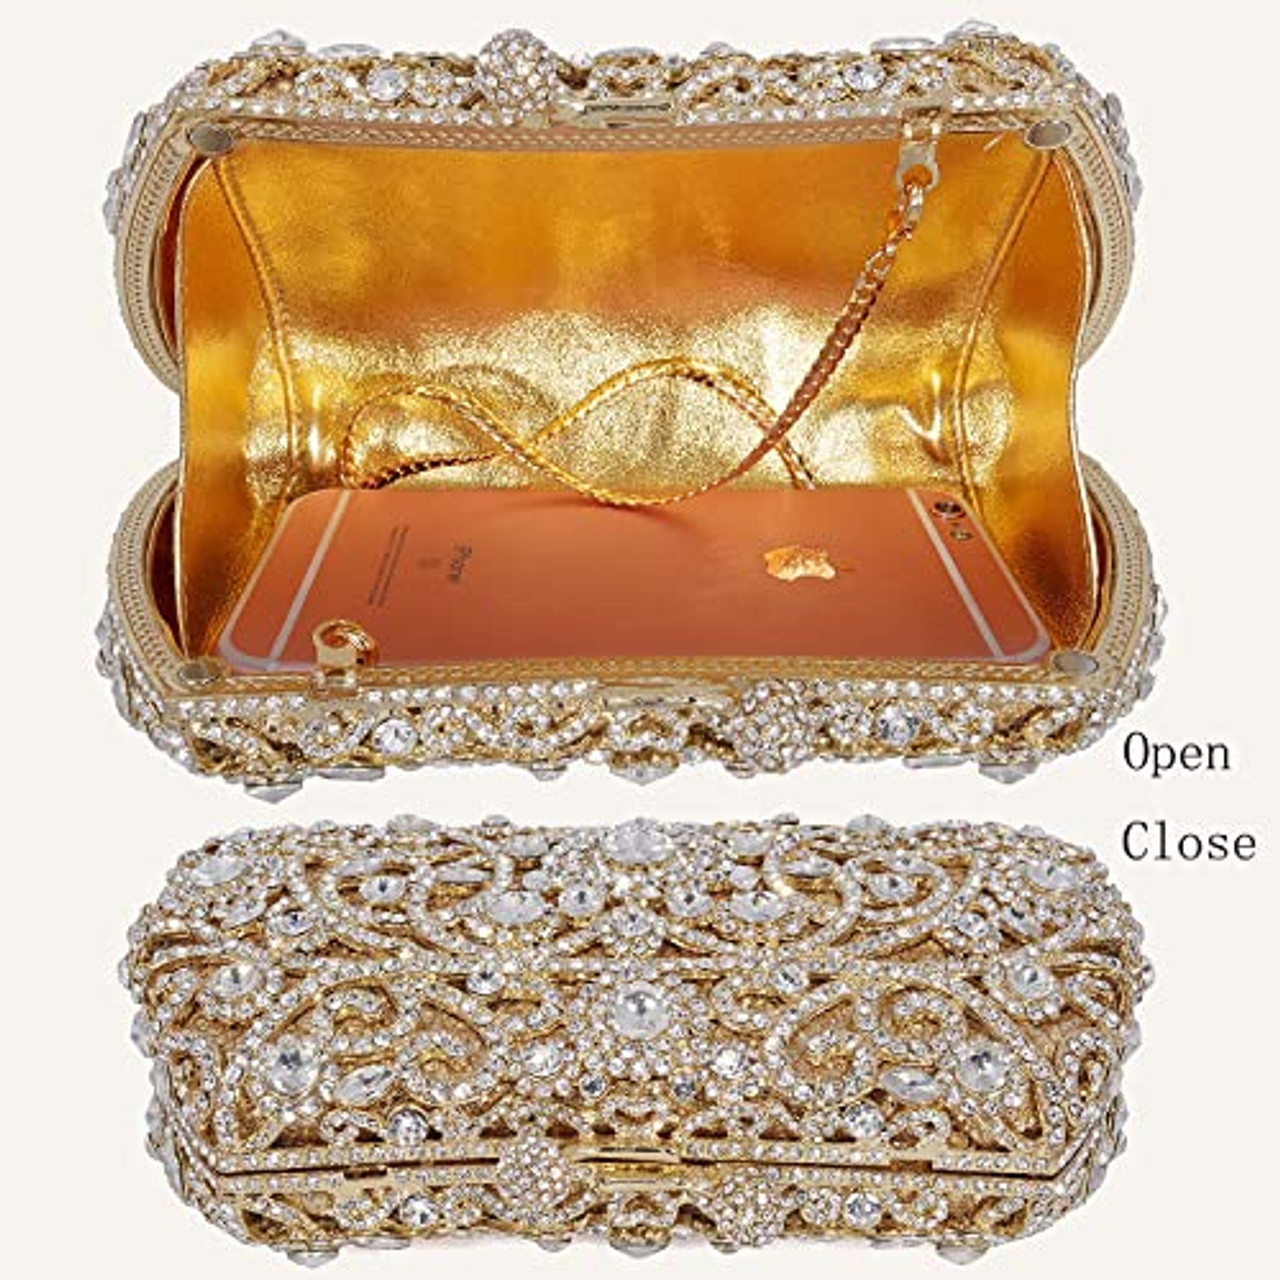 Emerald Green Crystal Clutch With the Detachable Chain Bridal